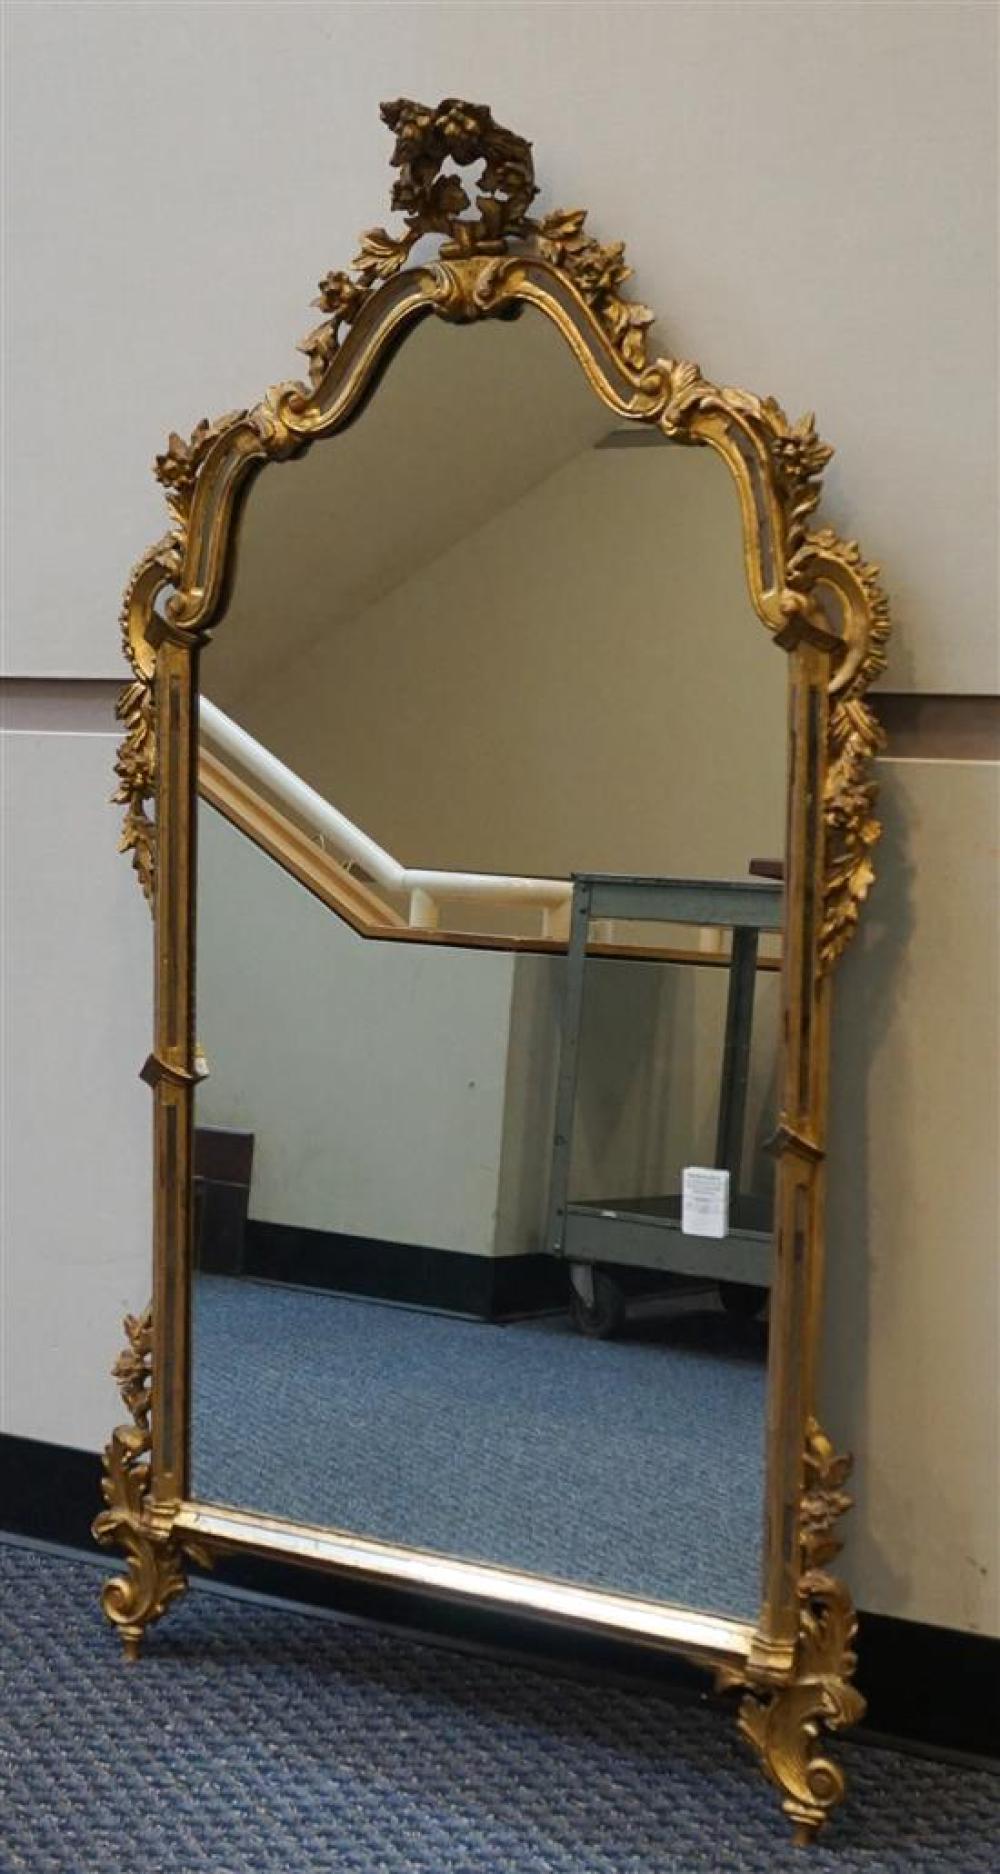 LOUIS XV STYLE GILT DECORATED MIRROR  320c0a